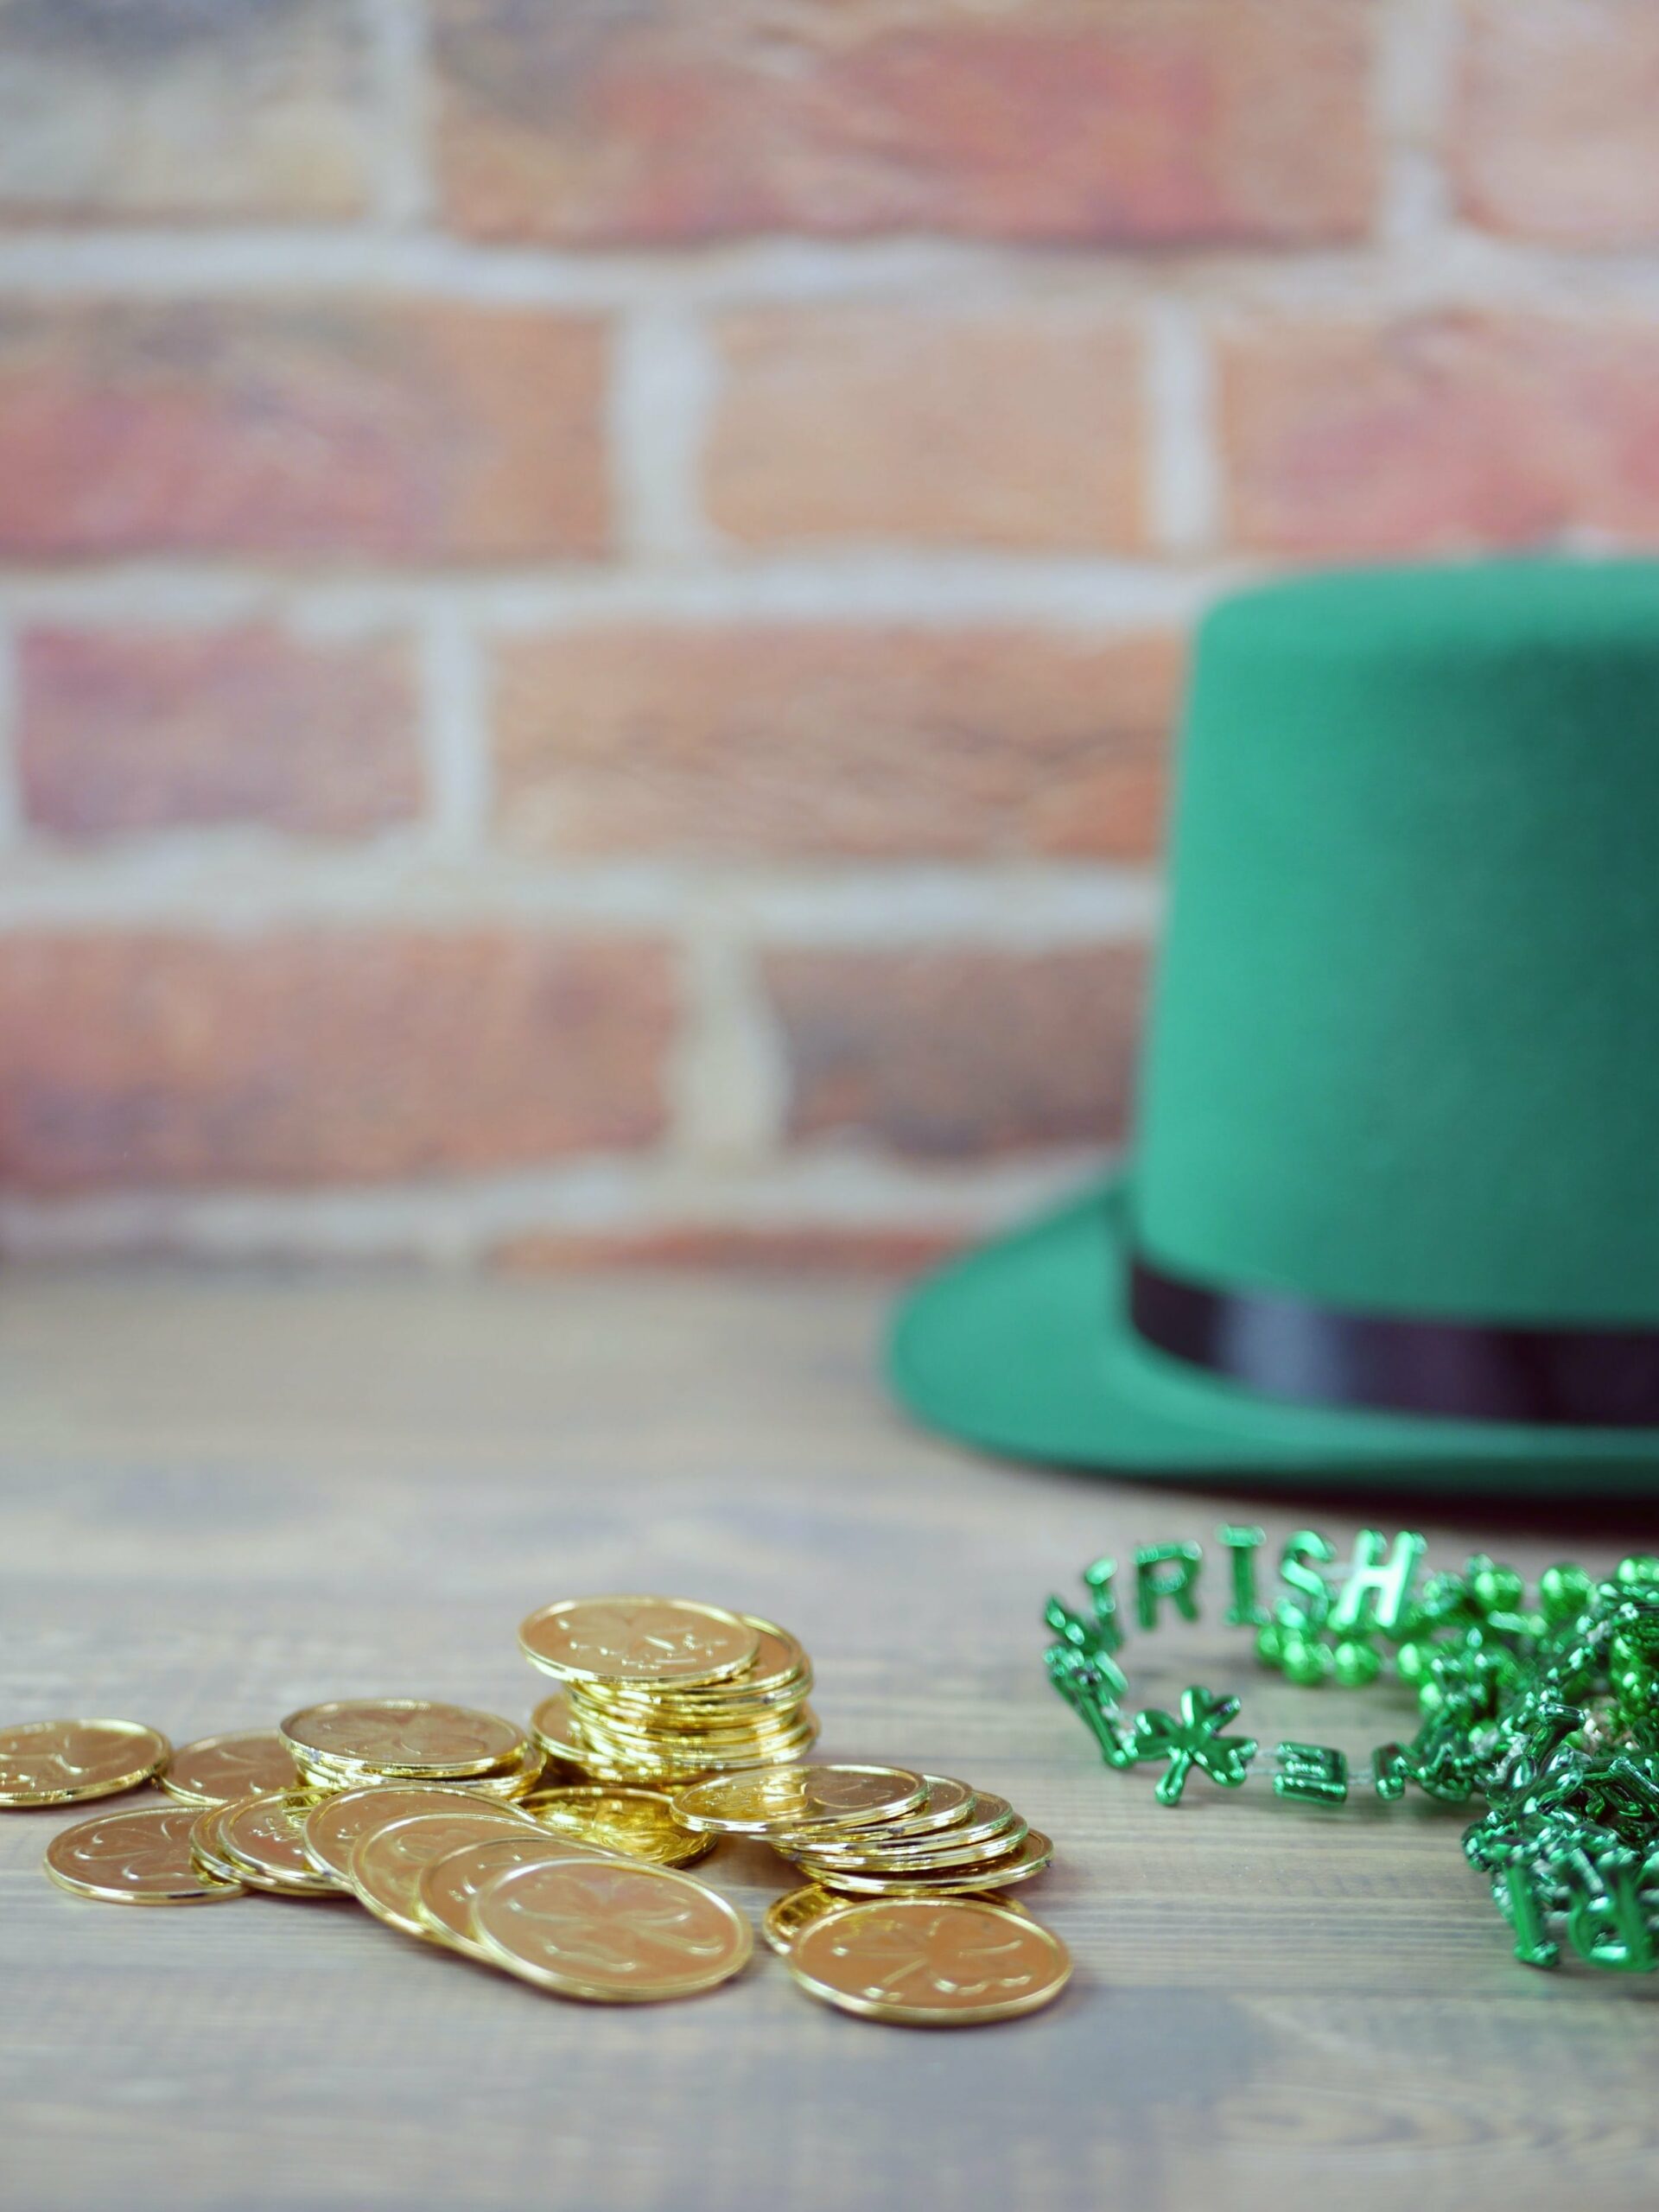 A photo of a green hat, green beads and coins to celebrate St. Patrick's Day